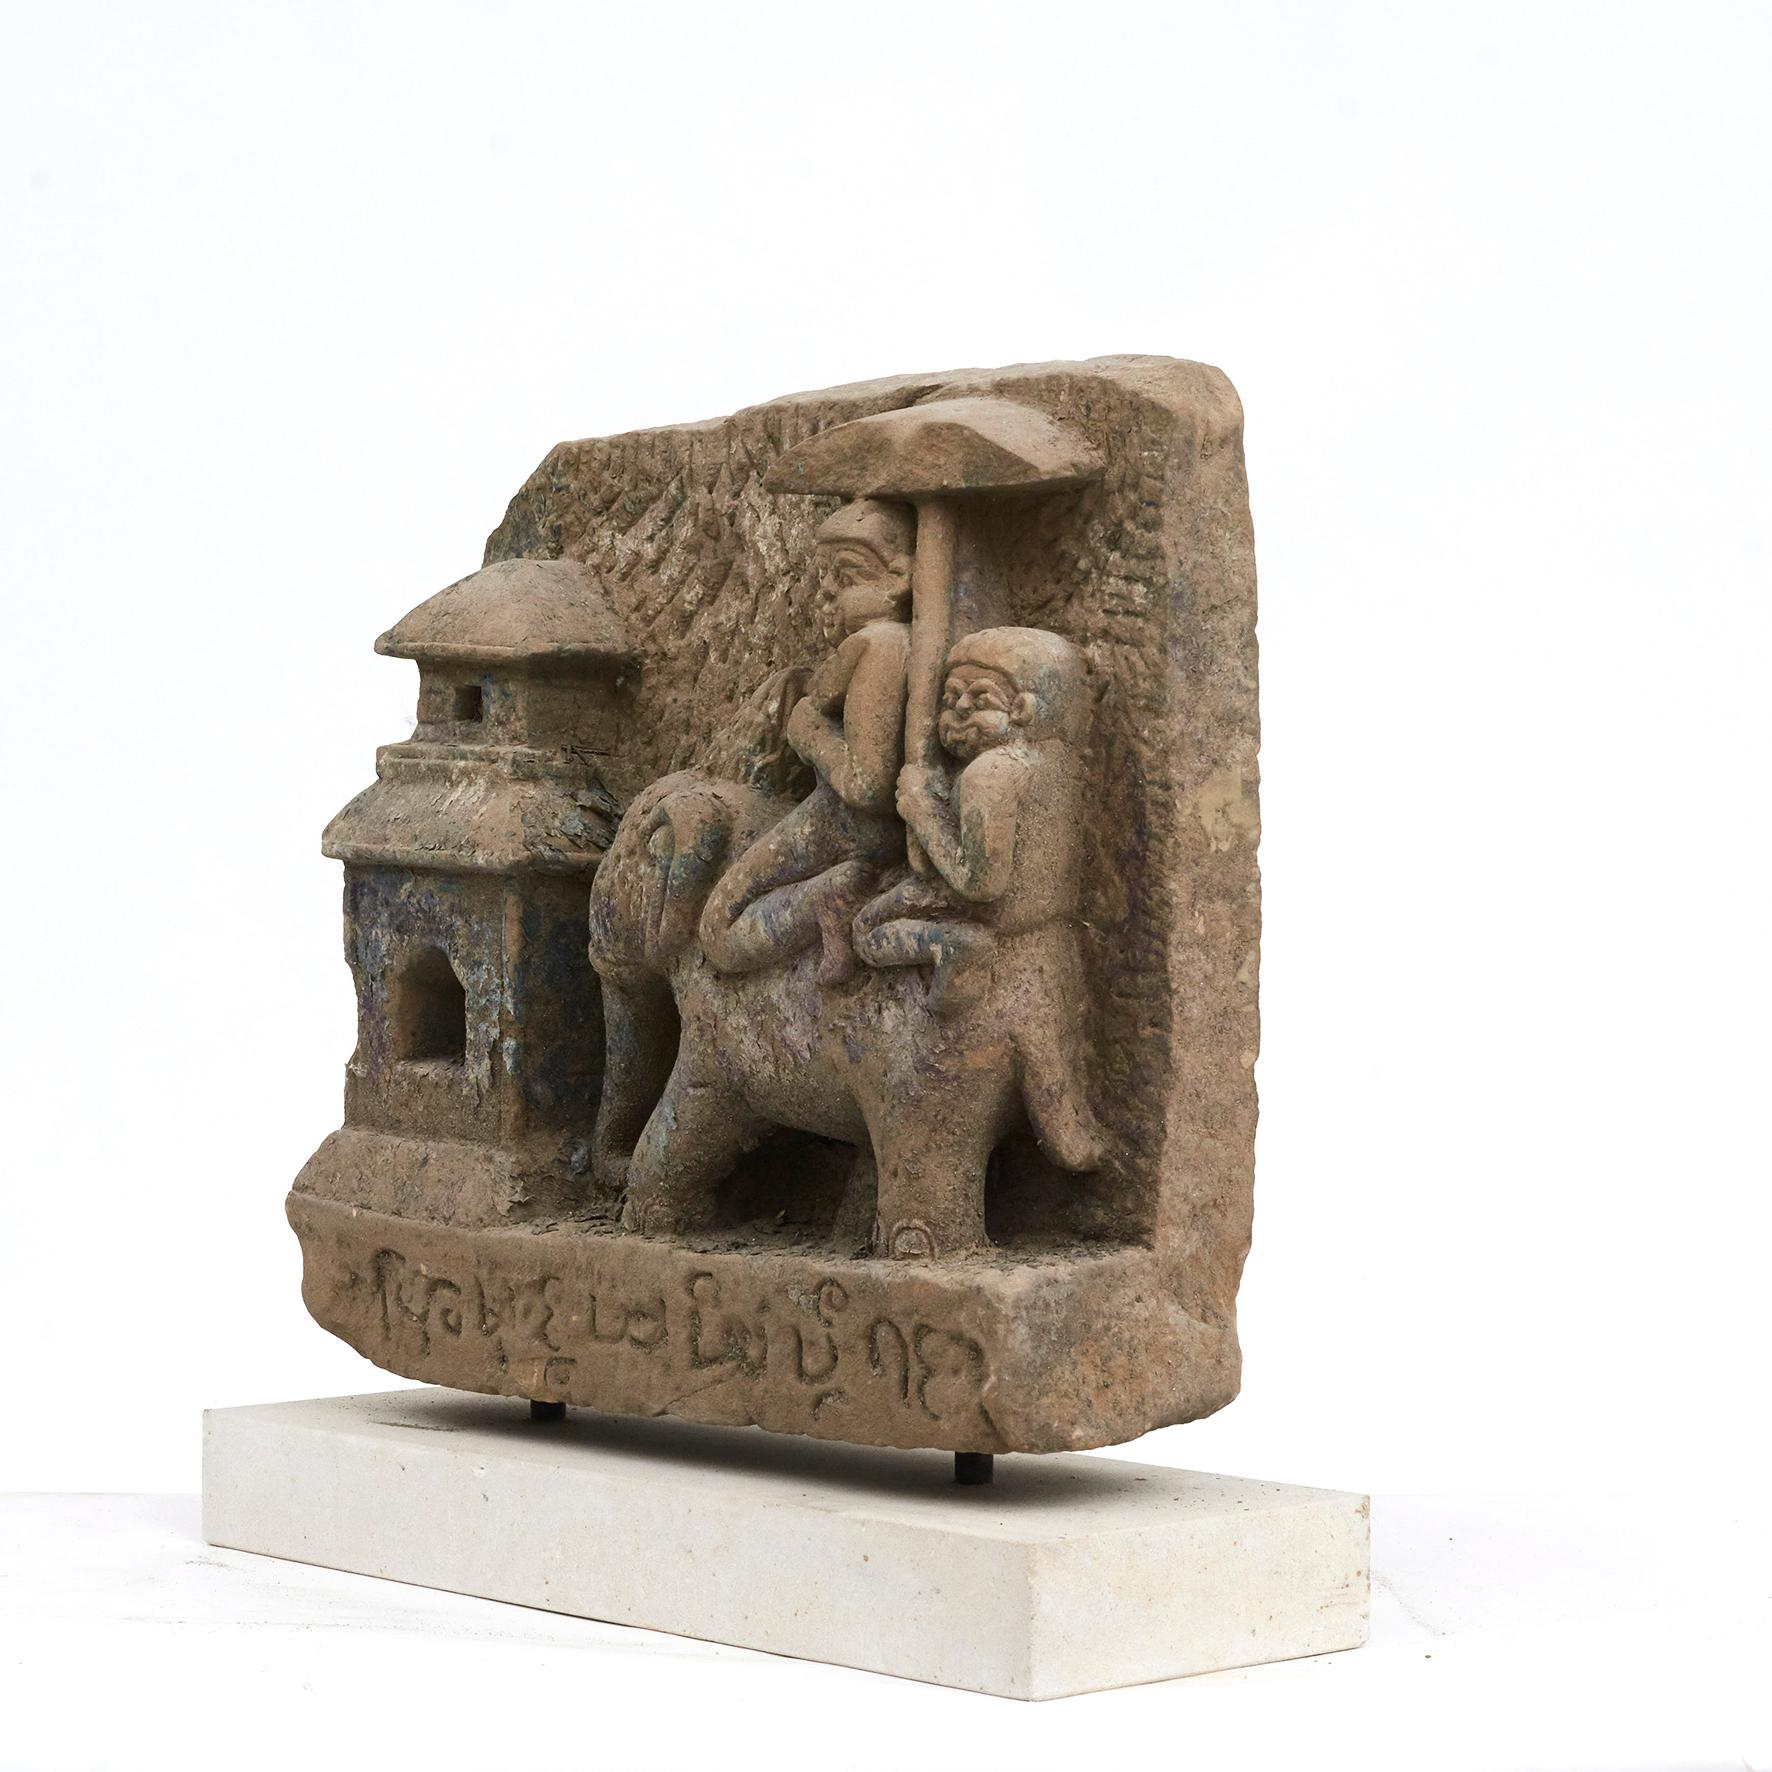 500-600 Year old sandstone carving.
The sculpture is depicting 'Two demons riding an elephant at the pagoda'. 
From Buddha pagoda / temple in Arakan, Burma.

Naive and charming in its design. With a beautiful patina. Mounted on light sandstone